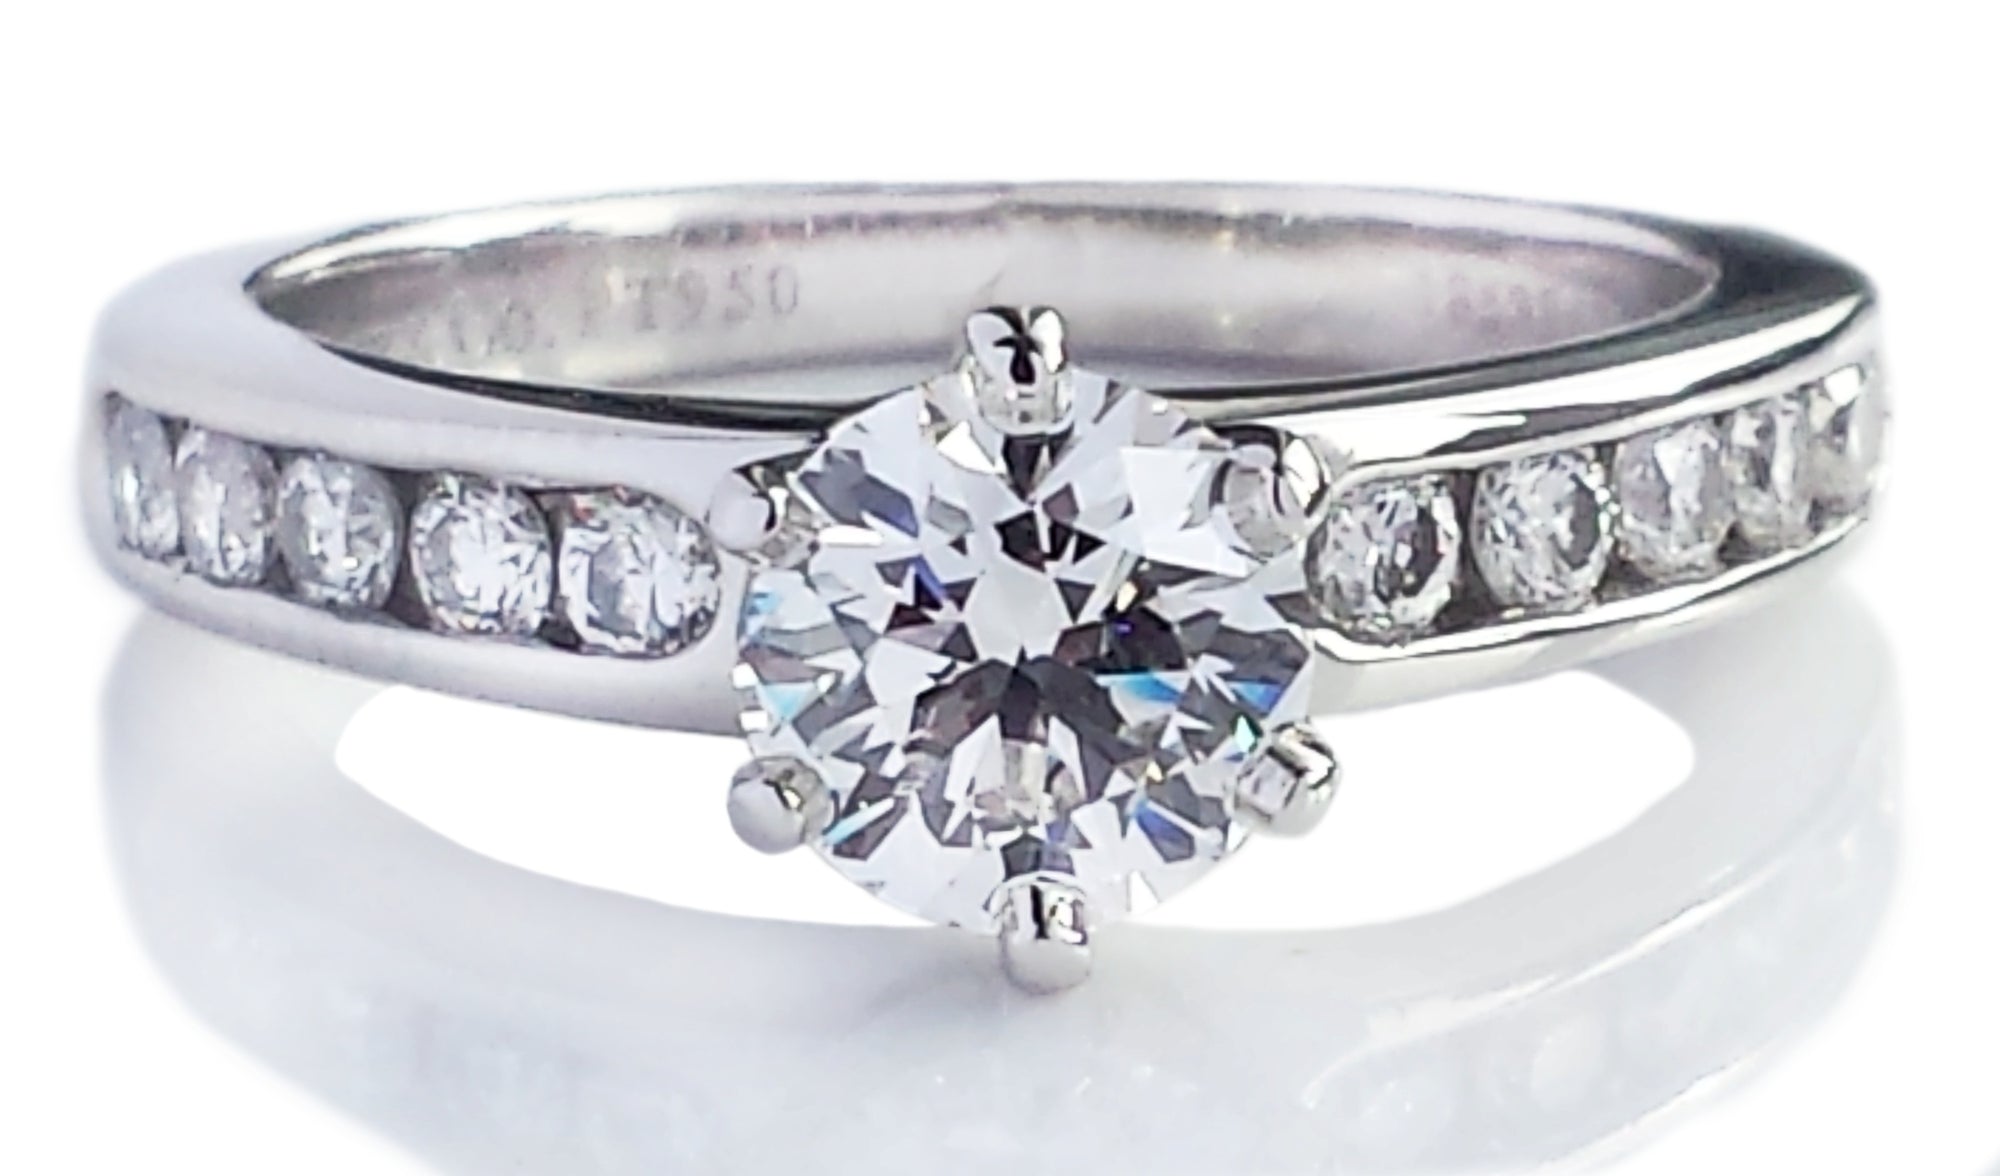 Tiffany & Co. 1.13tcw E/VS1 Round Brilliant Cut Diamond Engagement Ring with Side Stones